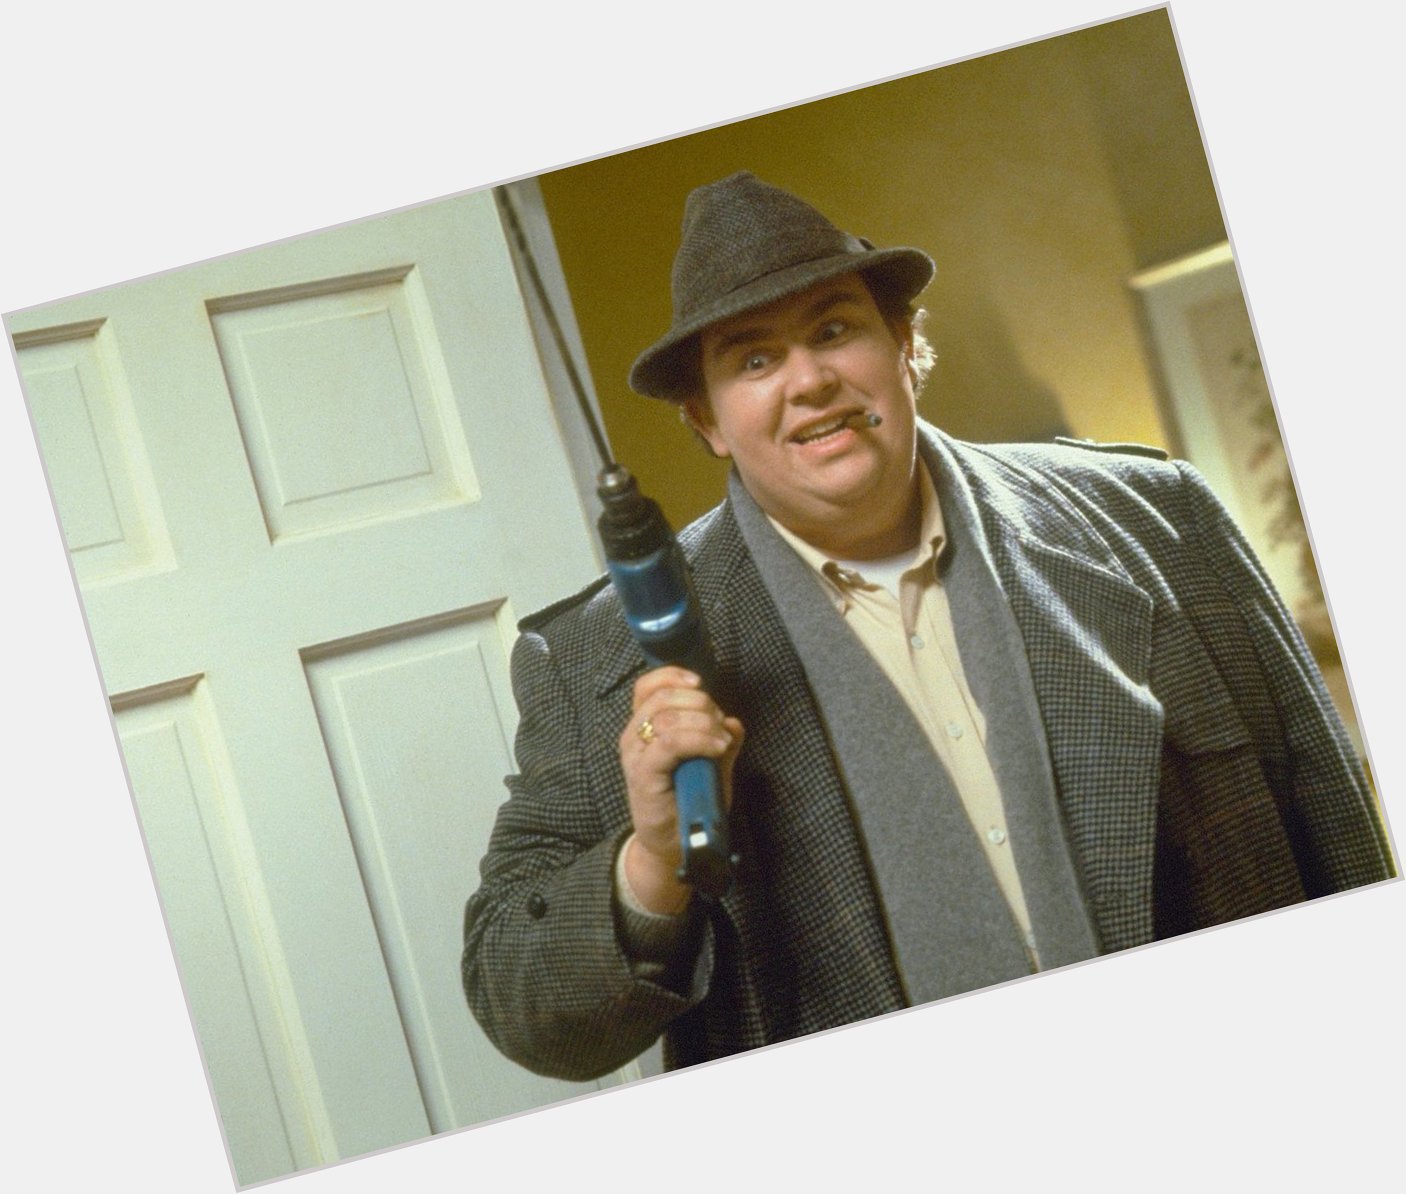 Happy Birthday to John Candy, who would have turned 67 today! 